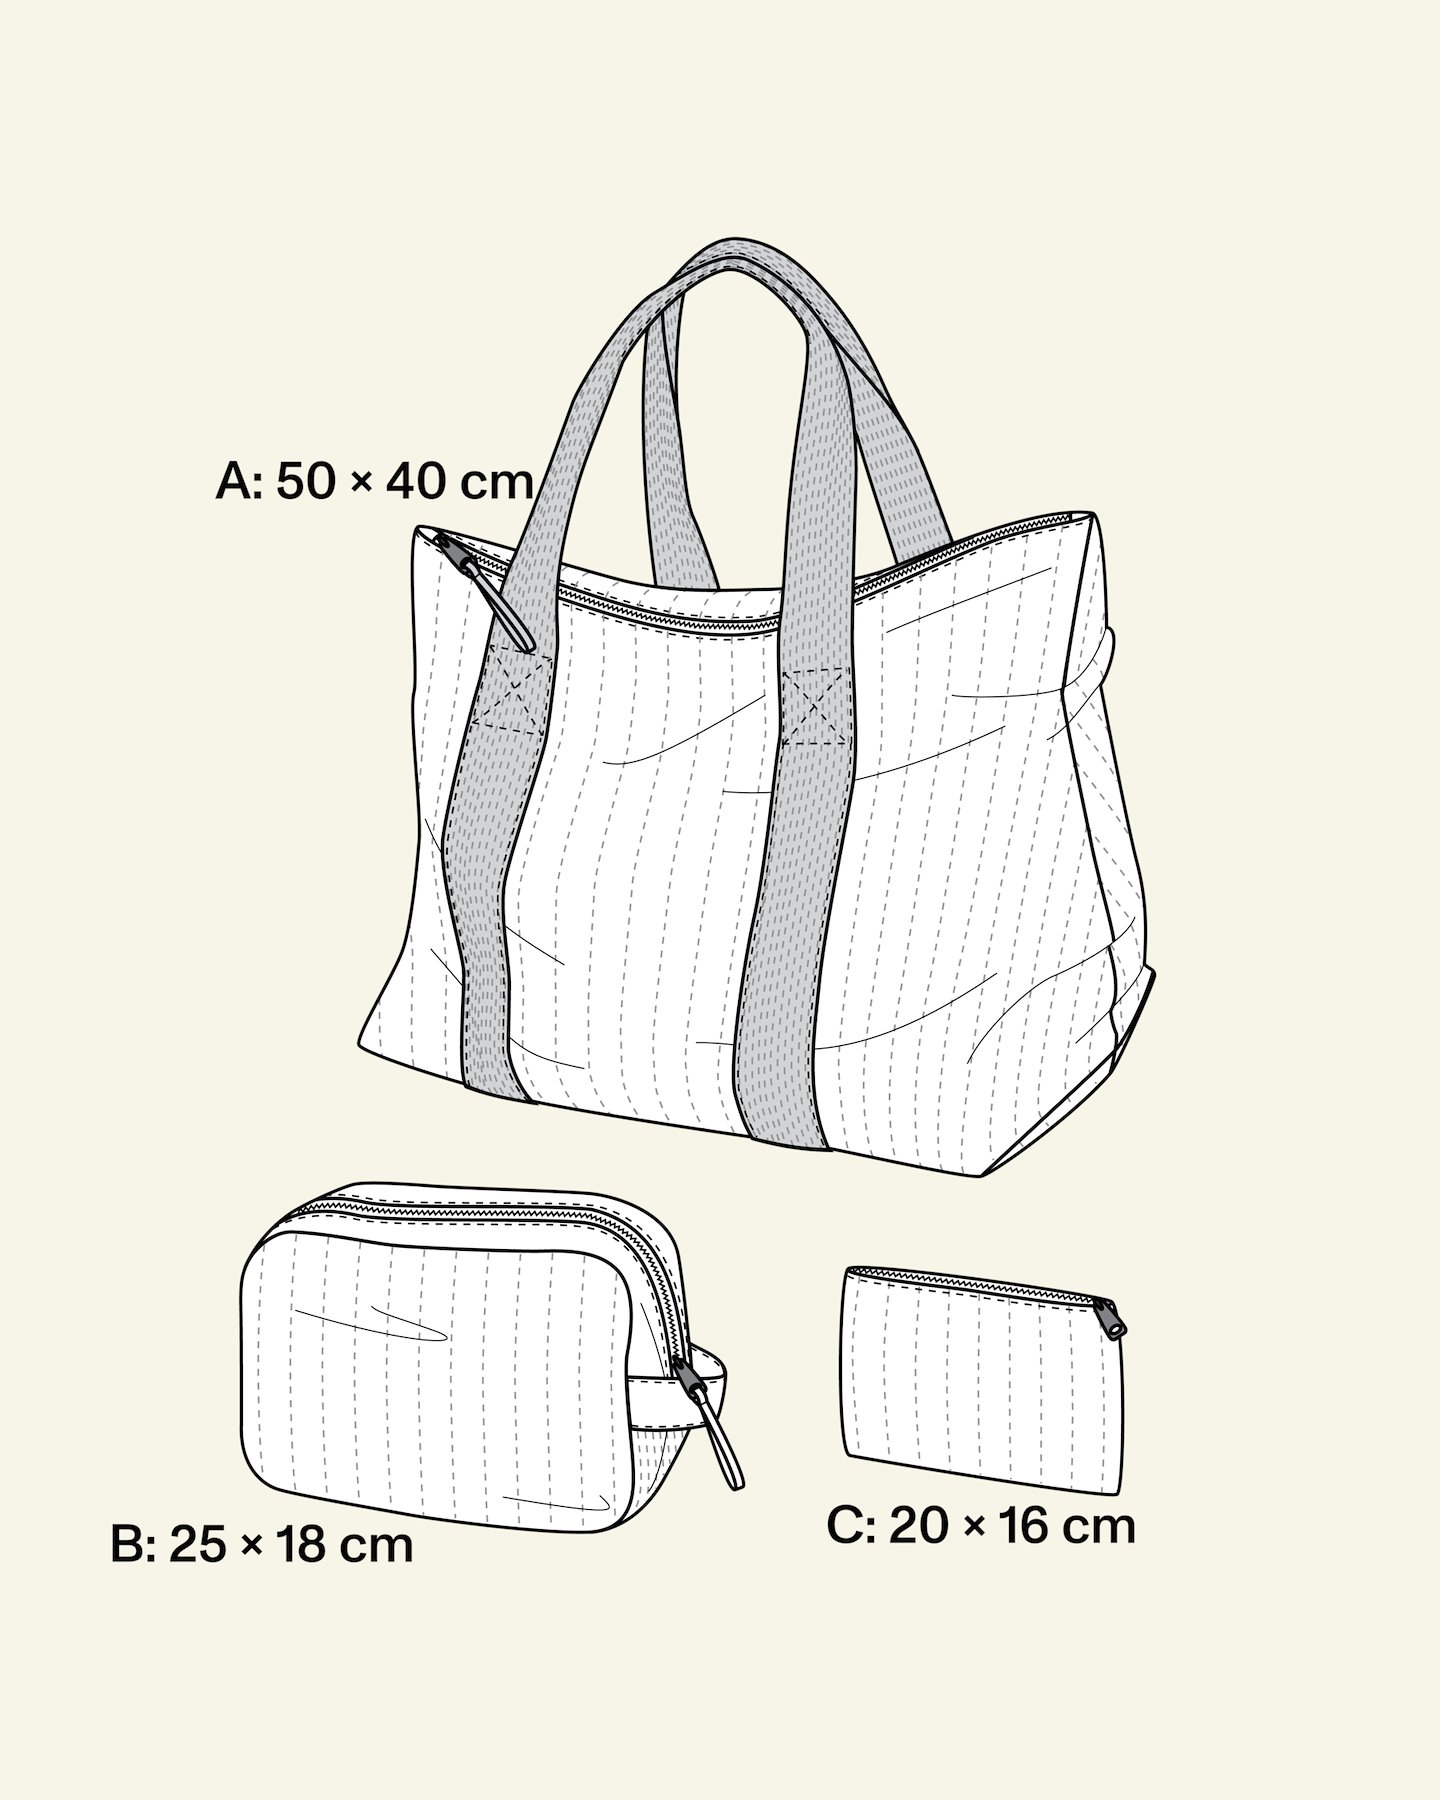 Bag, toiletry bag and cosmetic purse 9029400_pack